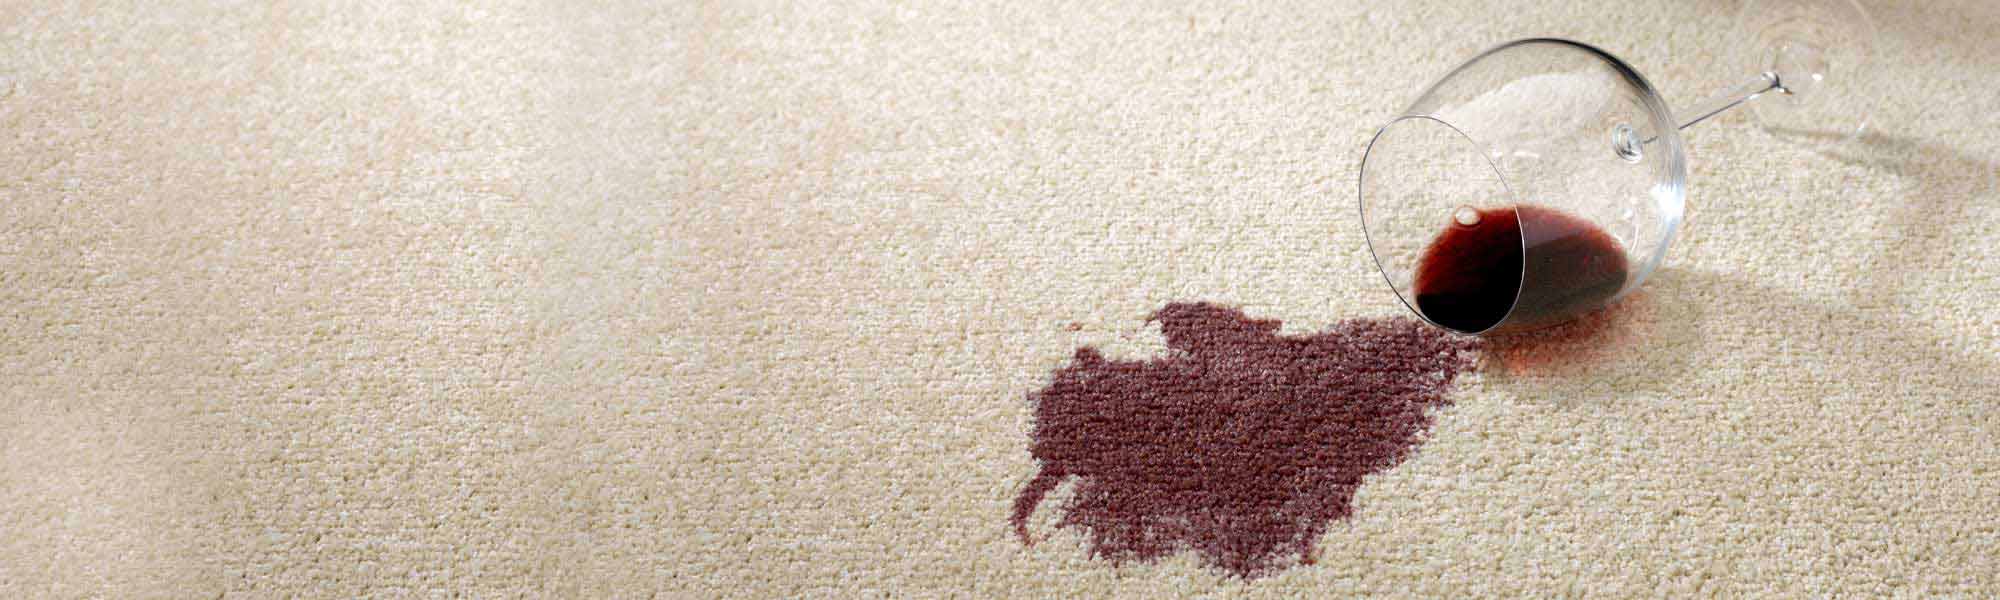 Specialty Stain Removal Service by Crystal Chem-Dry on Long Island, NY